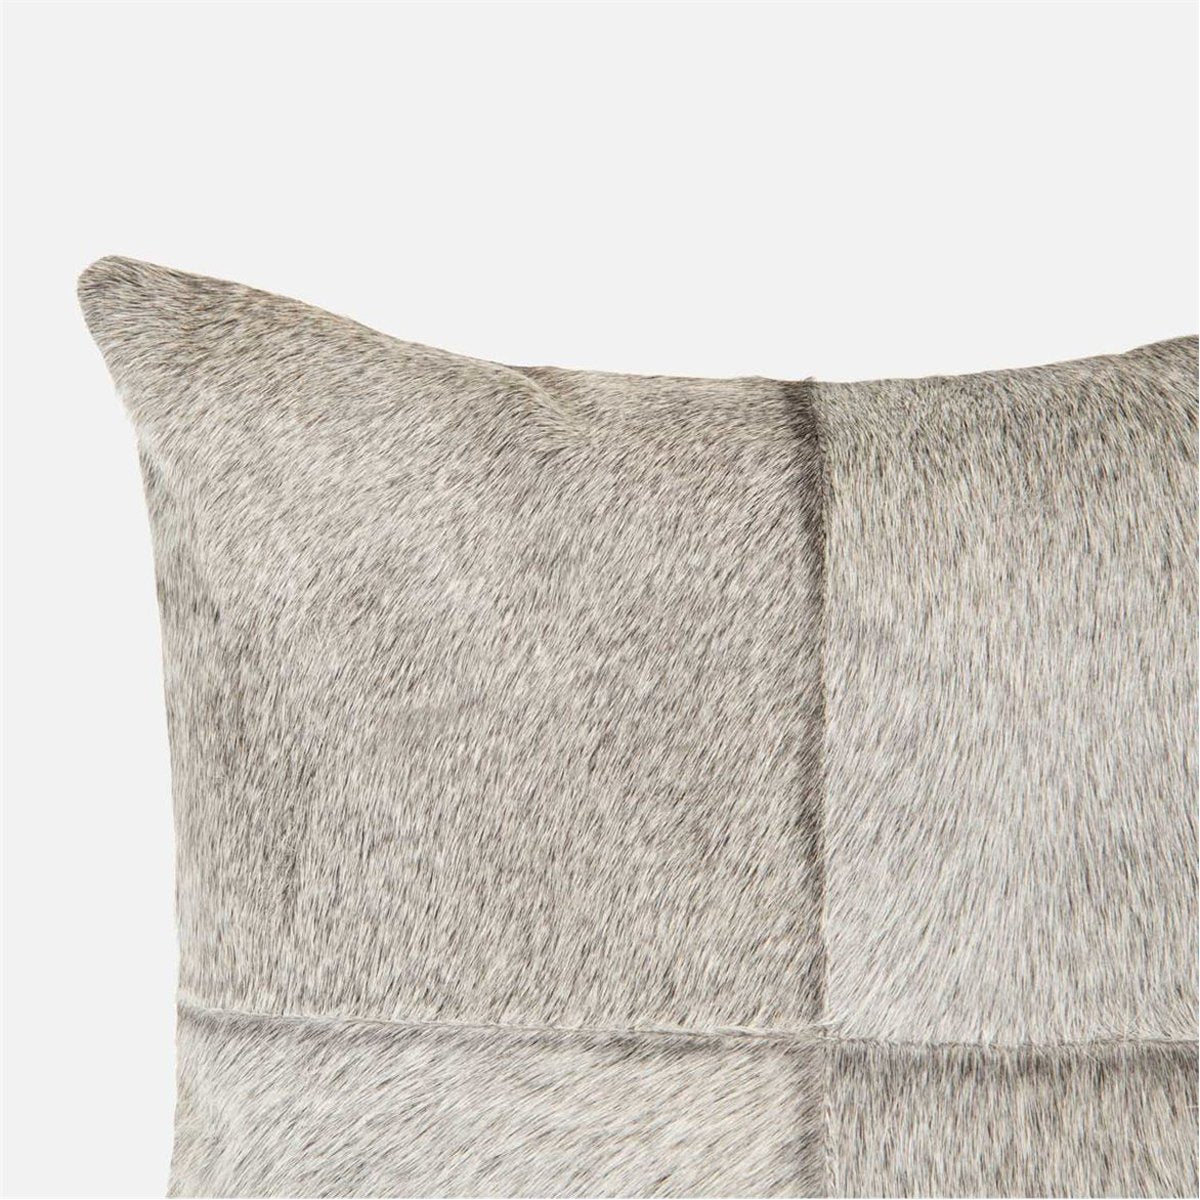 Made Goods Roger Patched Cowhide Pillows, Set of 2